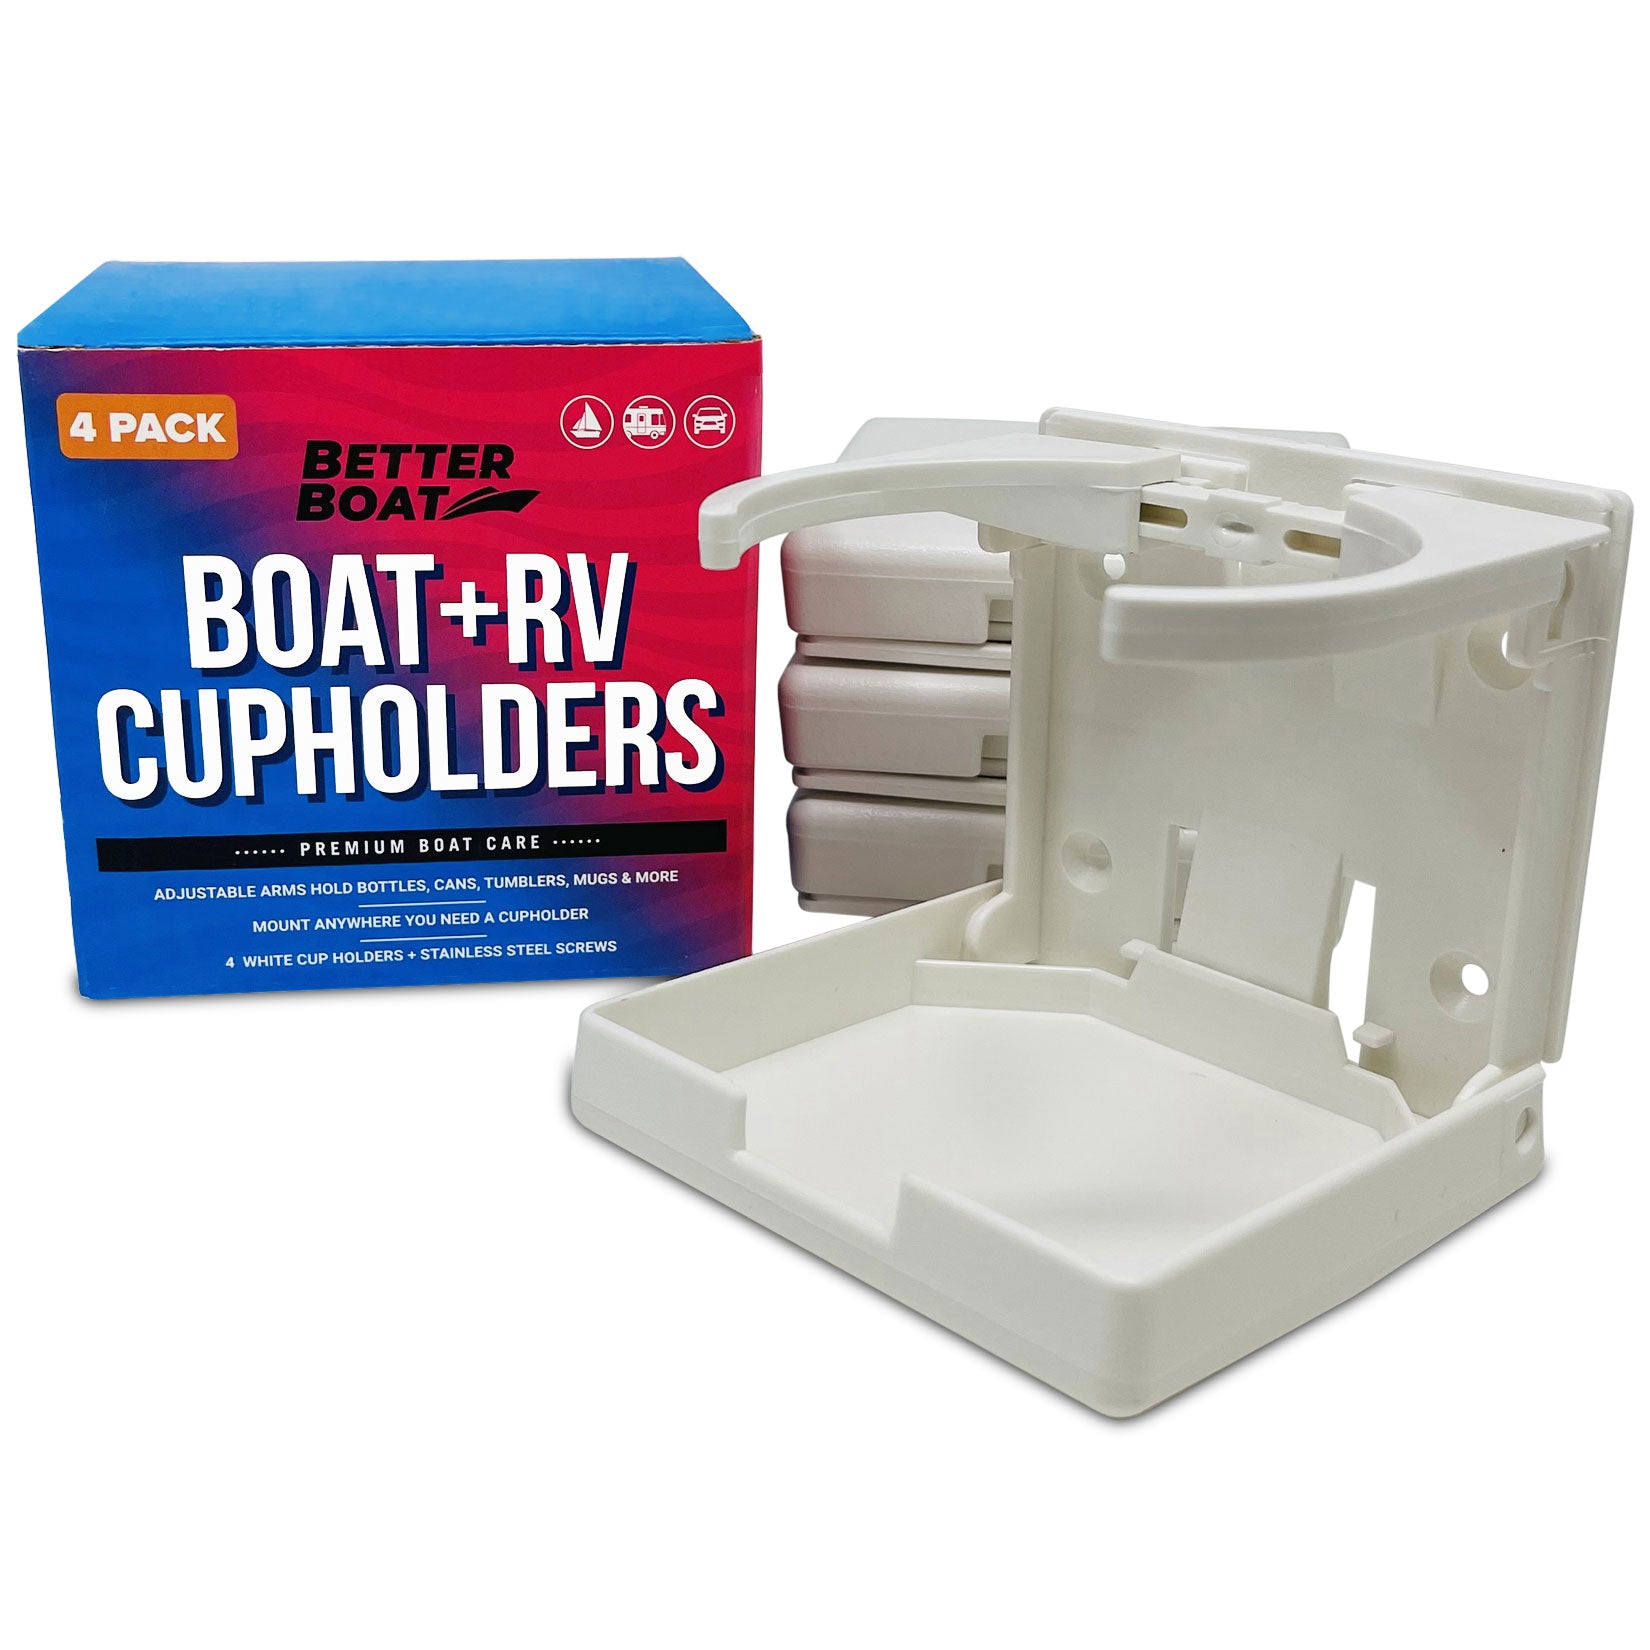 Mountable Plastic Drink & Cup Holders for Boats, RVs, & More – Better Boat